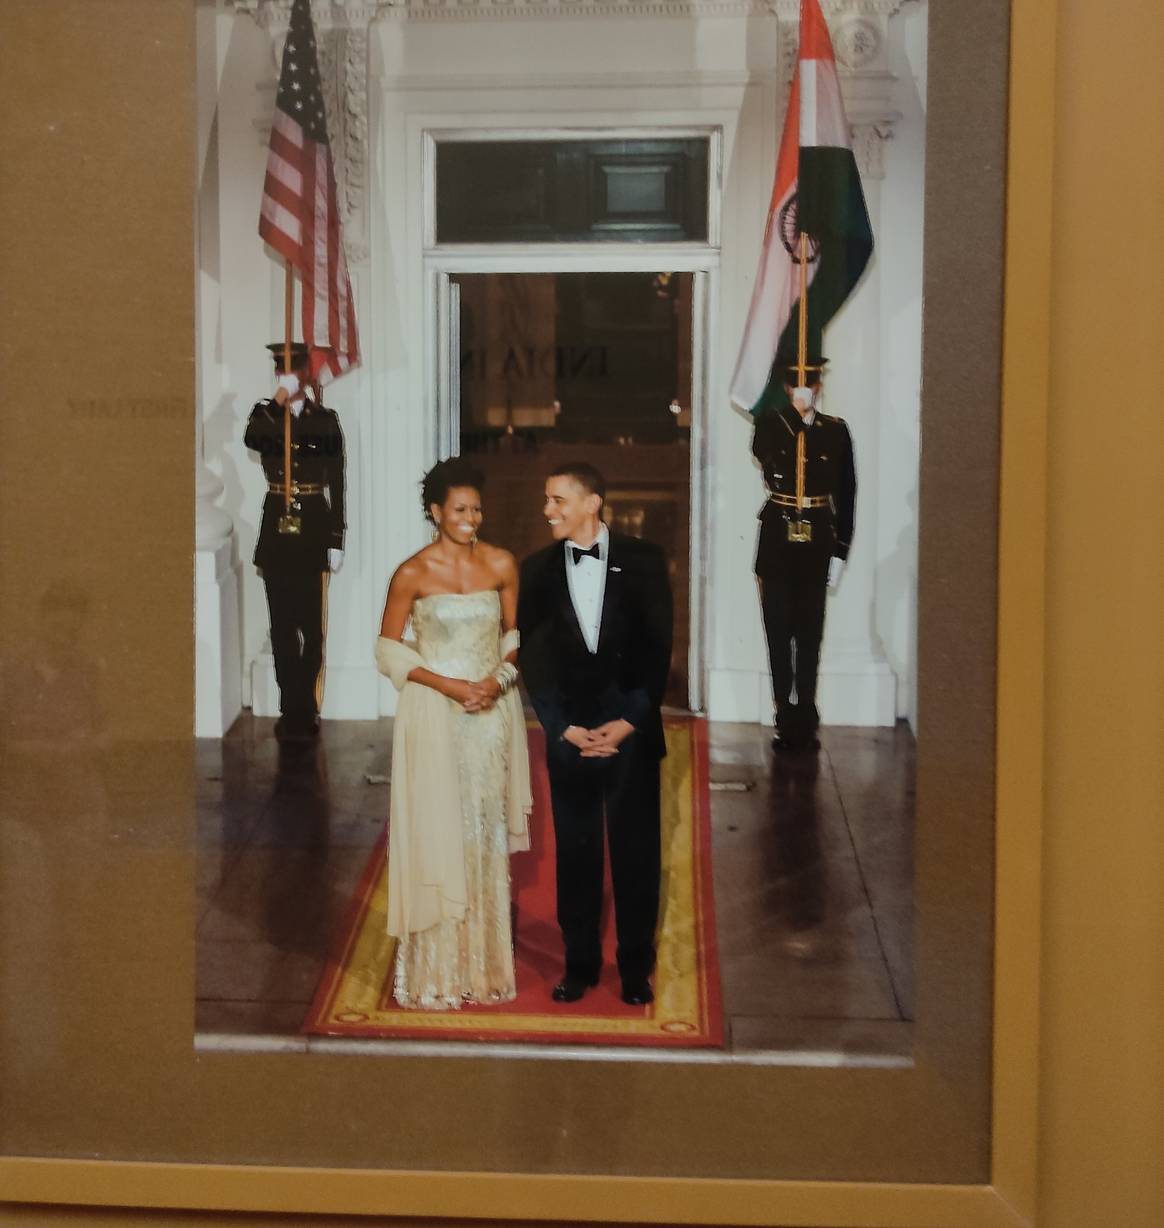 Michelle Obama in a dress by Indian-American designer Naeem Khan, which she wore in 2009 for the first state dinner with then prime minister of India, Manmohan Singh, and his wife. Image: Sumit Suryawanshi for FashionUnited